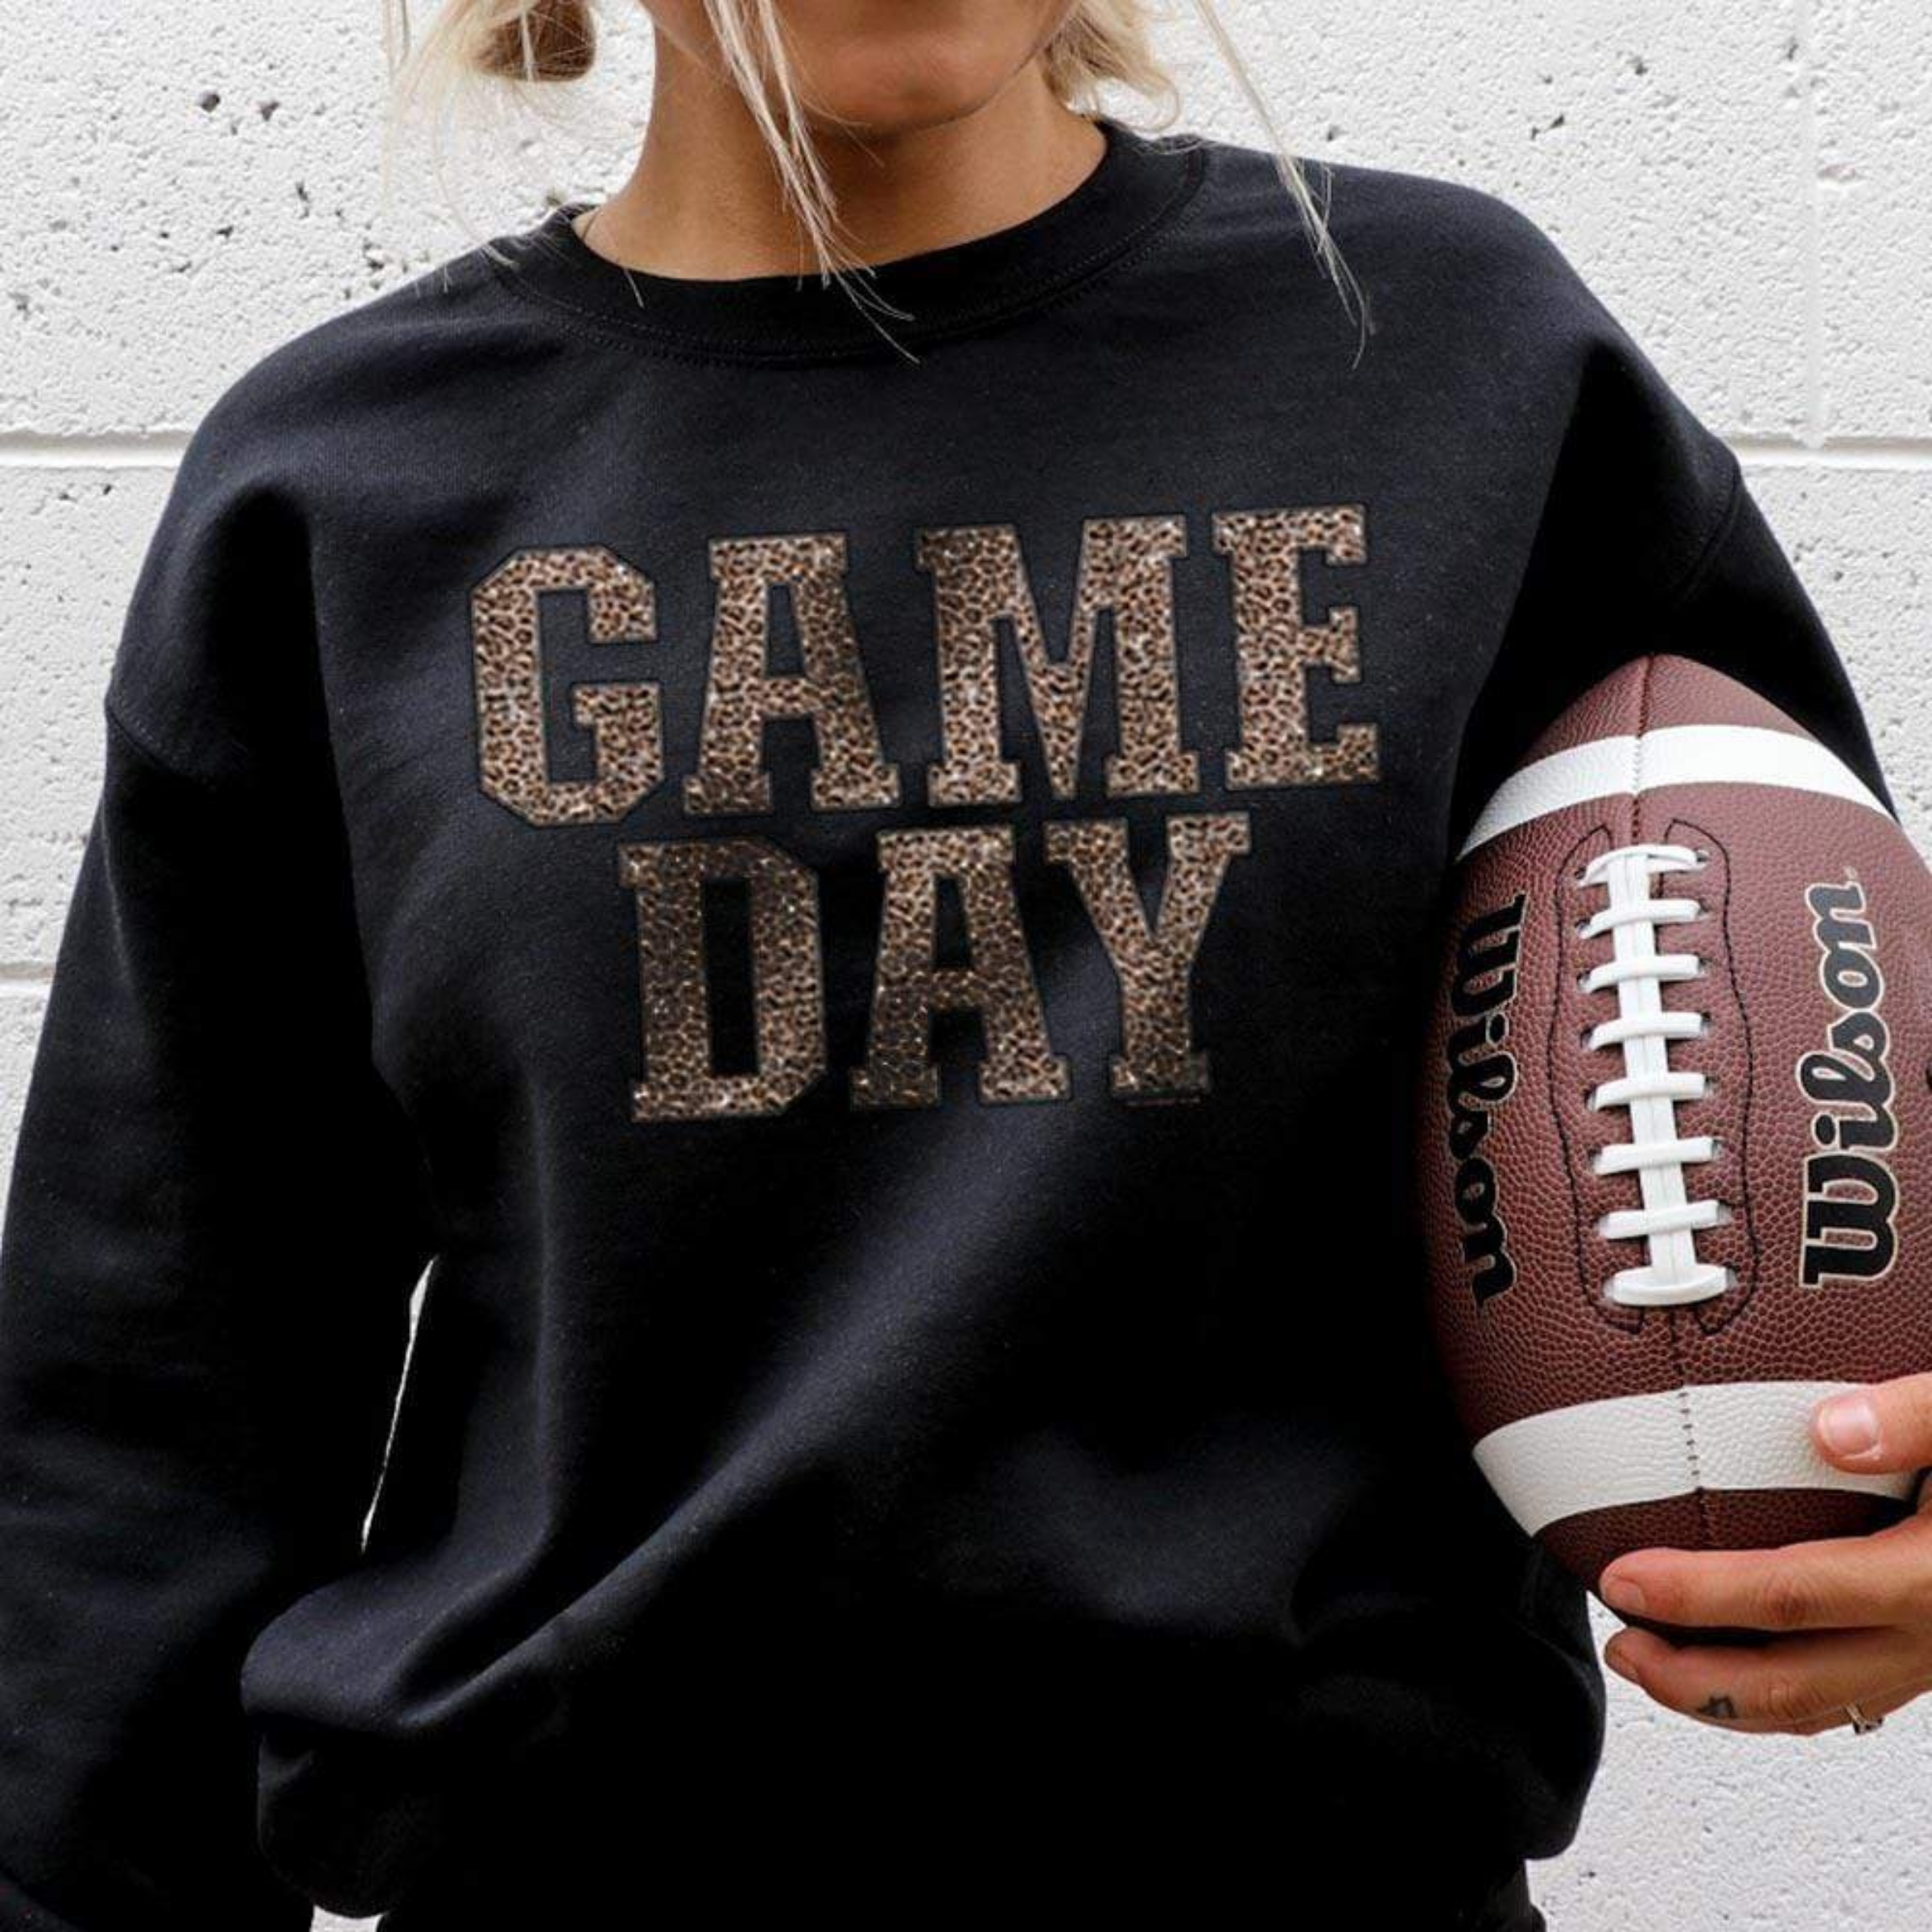 Model is wearing a black sweatshirt featuring a leopard print graphic that says "Game day"